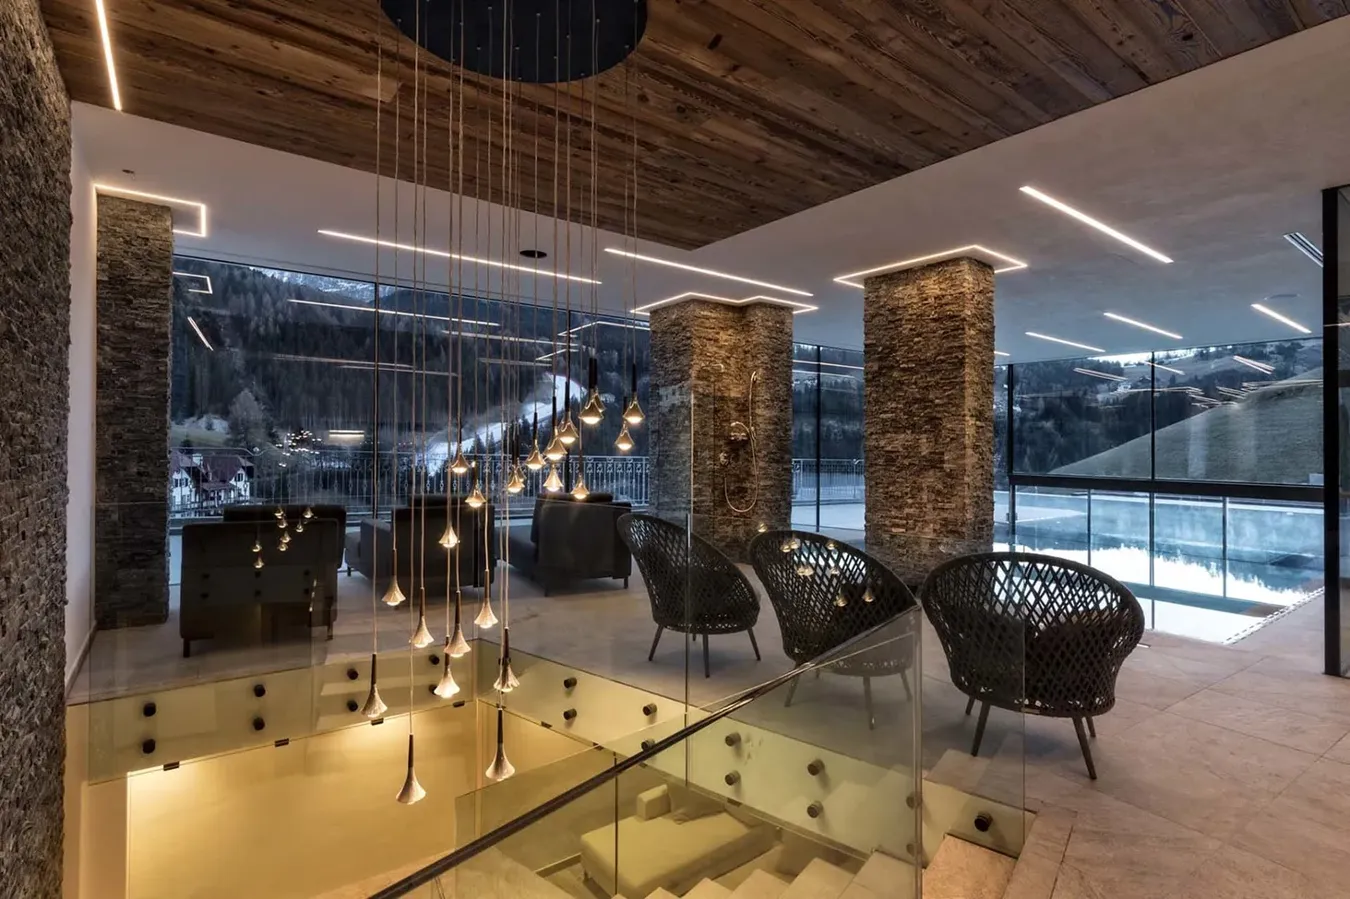 Luxurious mountain lounge with modern lighting, stone walls, and panoramic snowy landscape view.